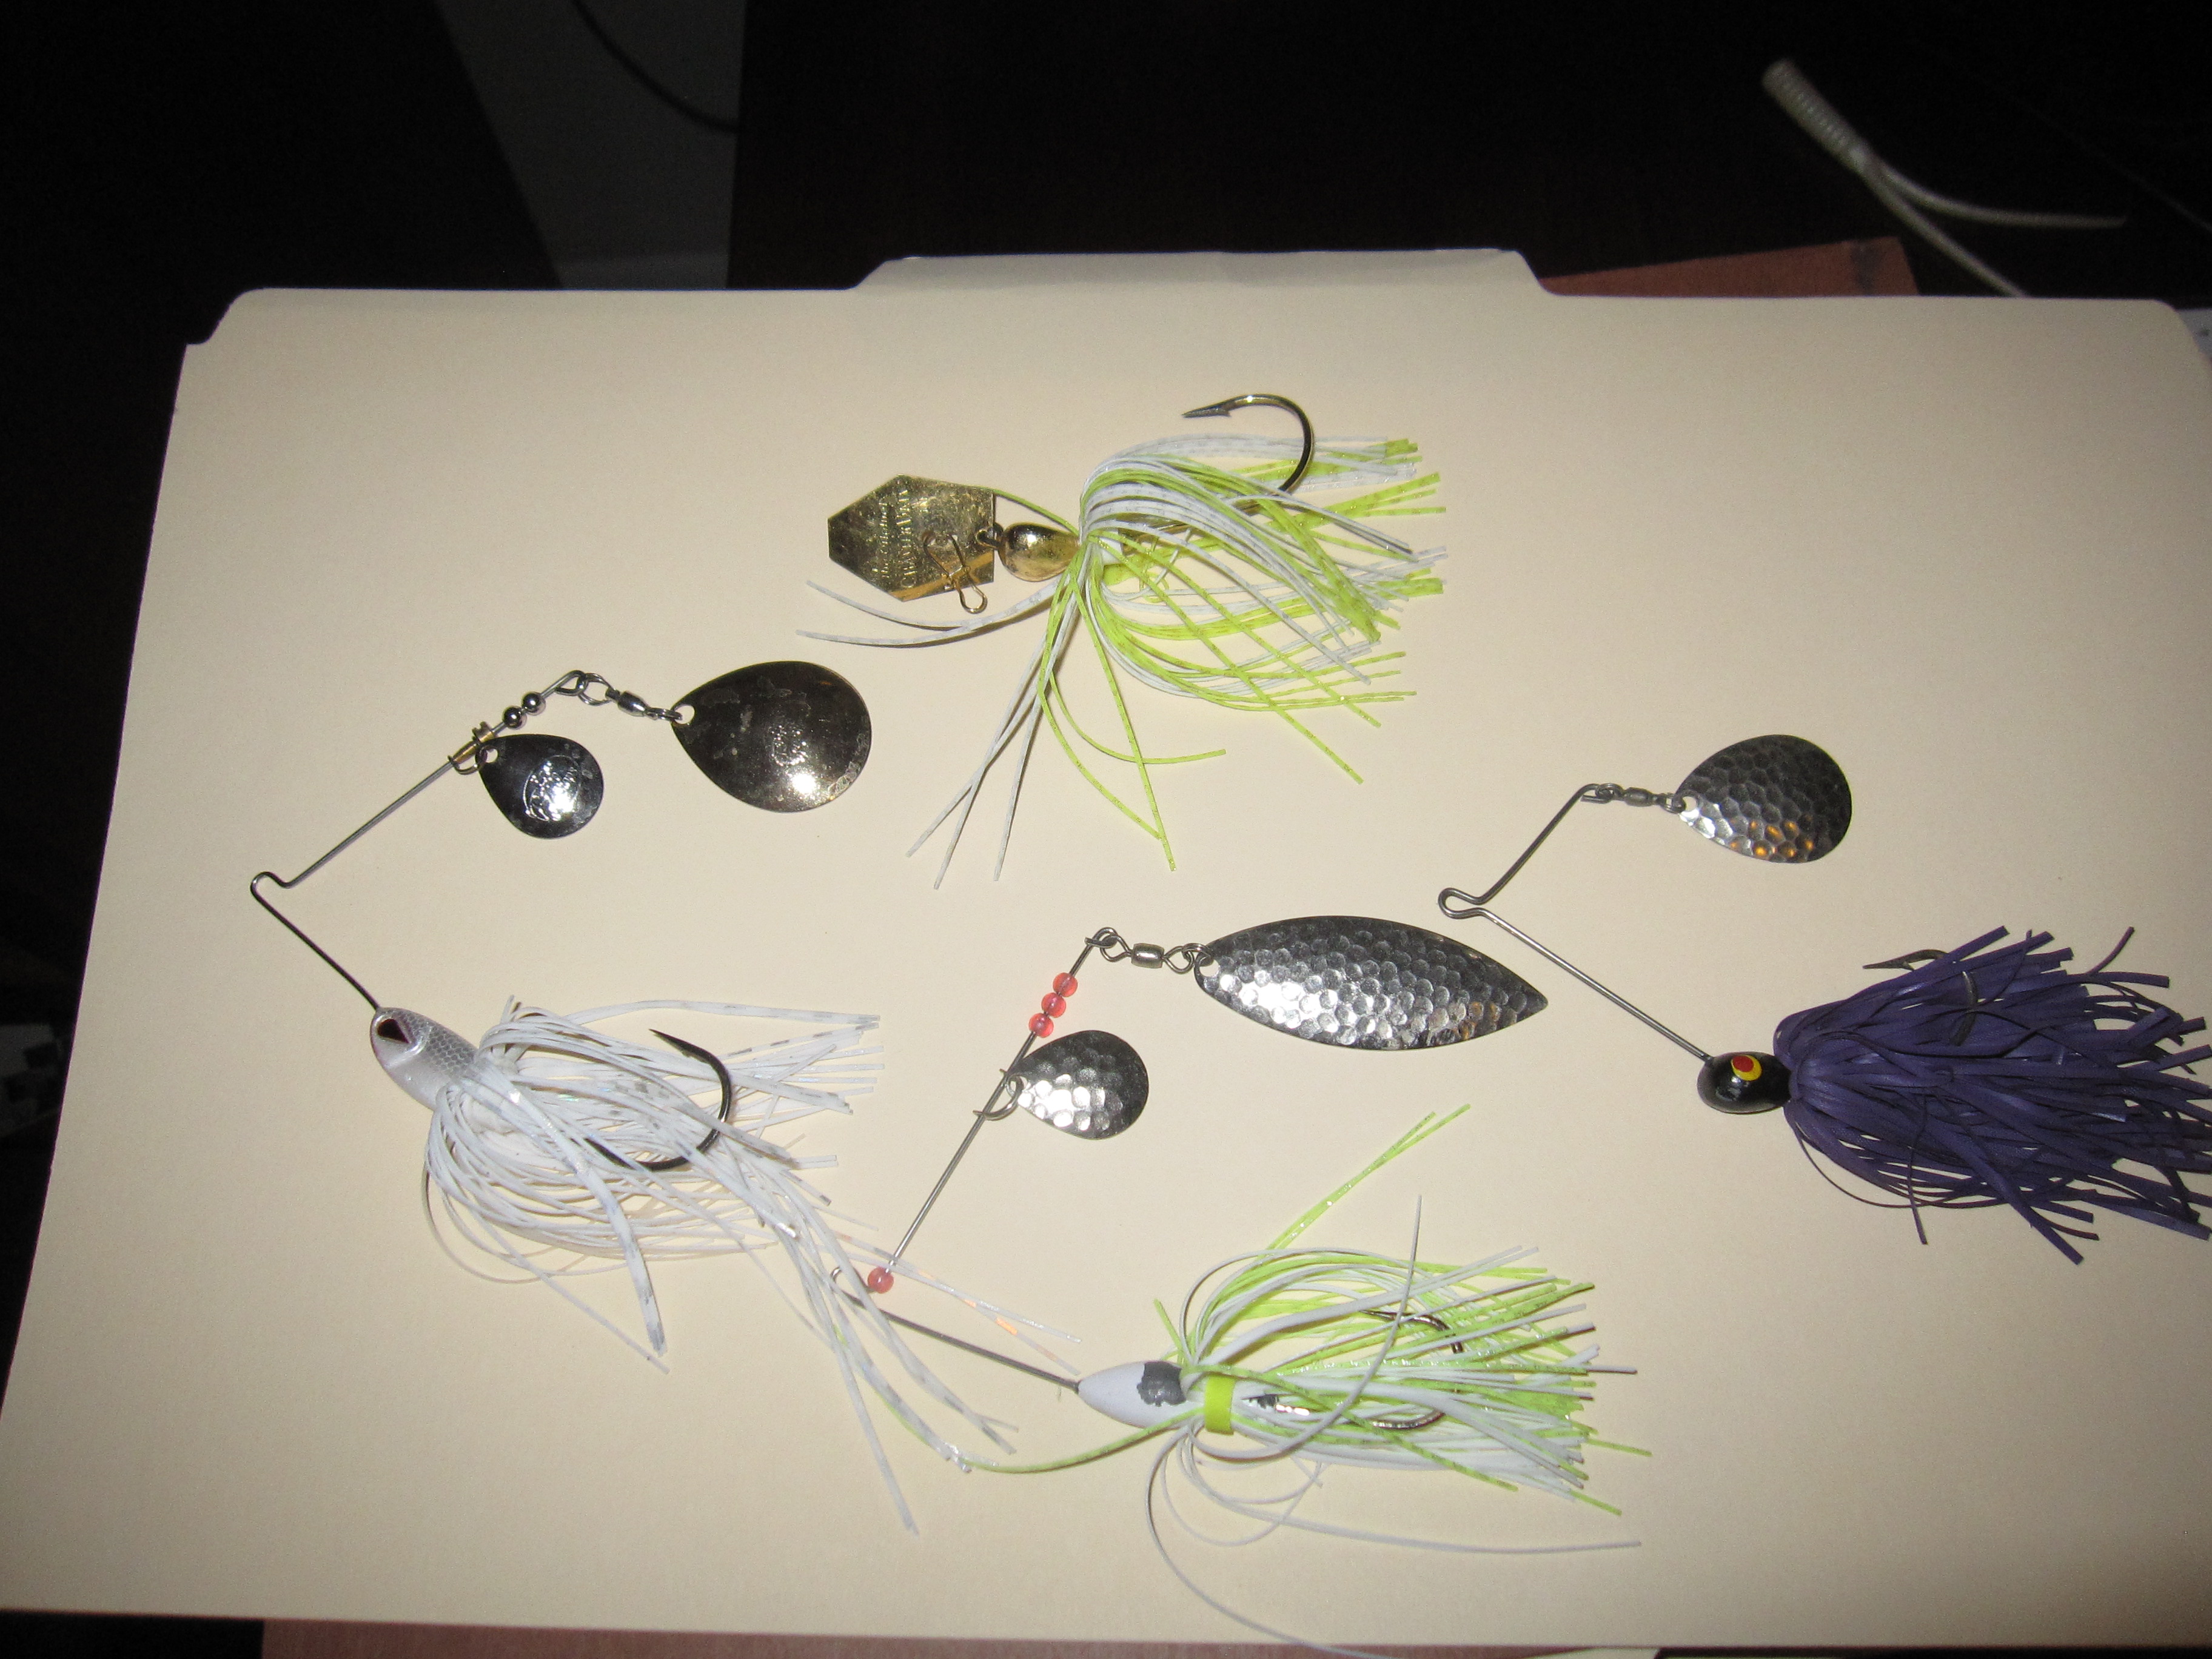 How to fish a spinnerbait – Waking a spinnerbait.